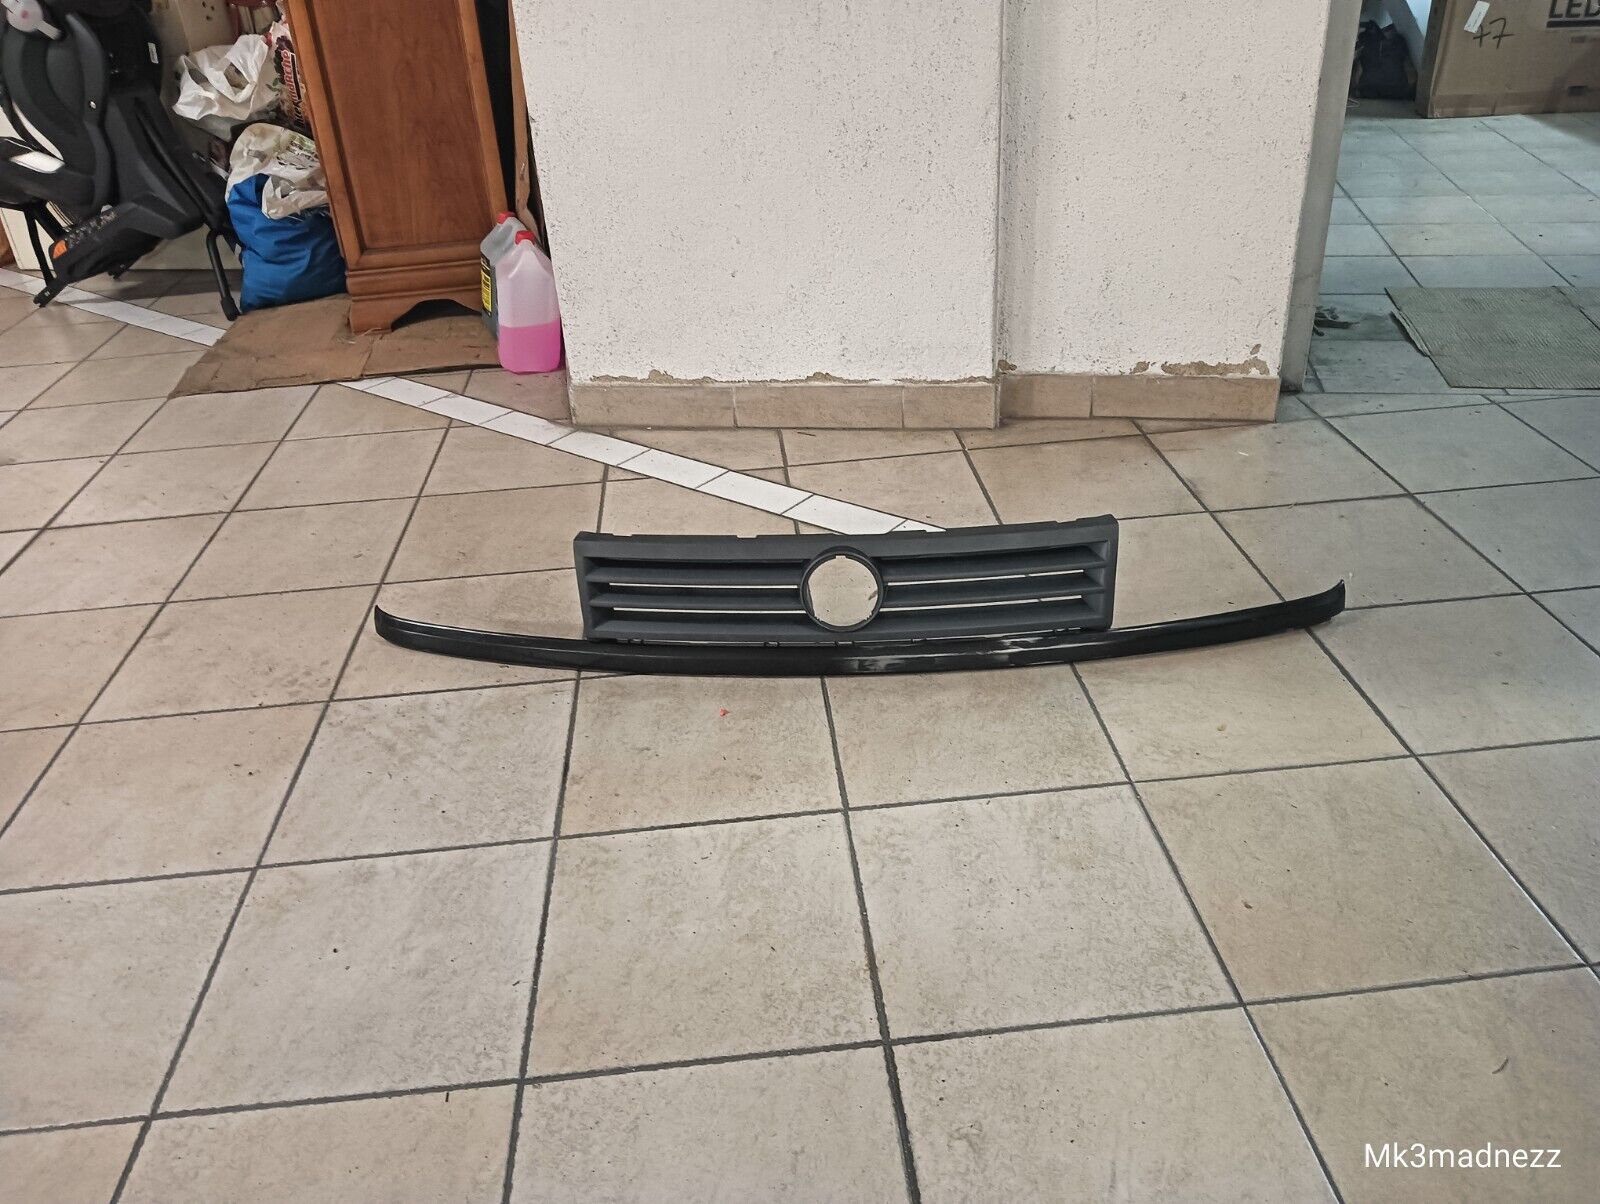 VW Vento Golf Mk3 Early Front Grill Phase1 Front Grill